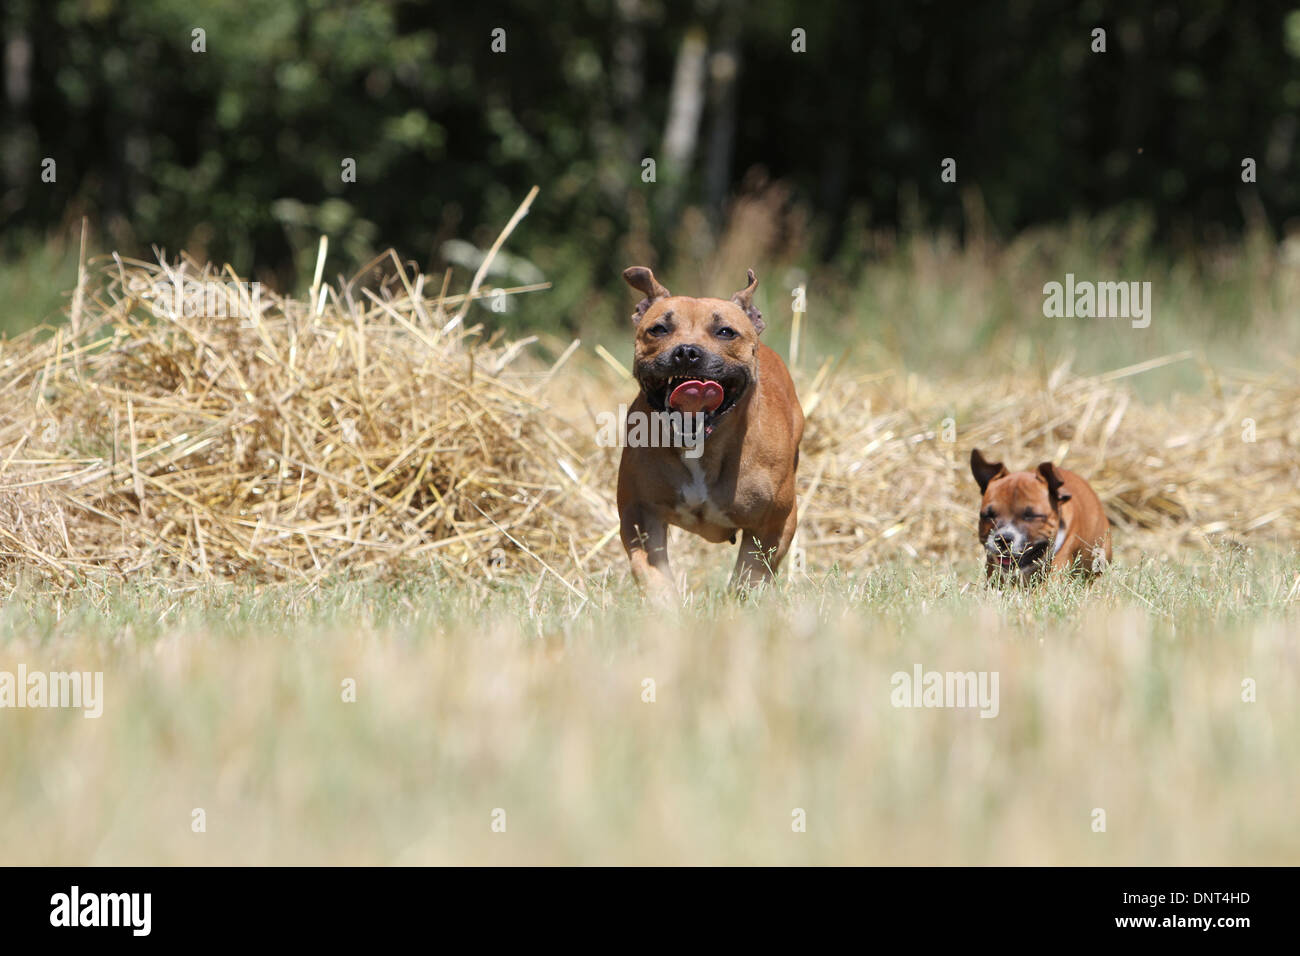 dog Staffordshire Bull Terrier / Staffie  adult and puppy running in a field Stock Photo